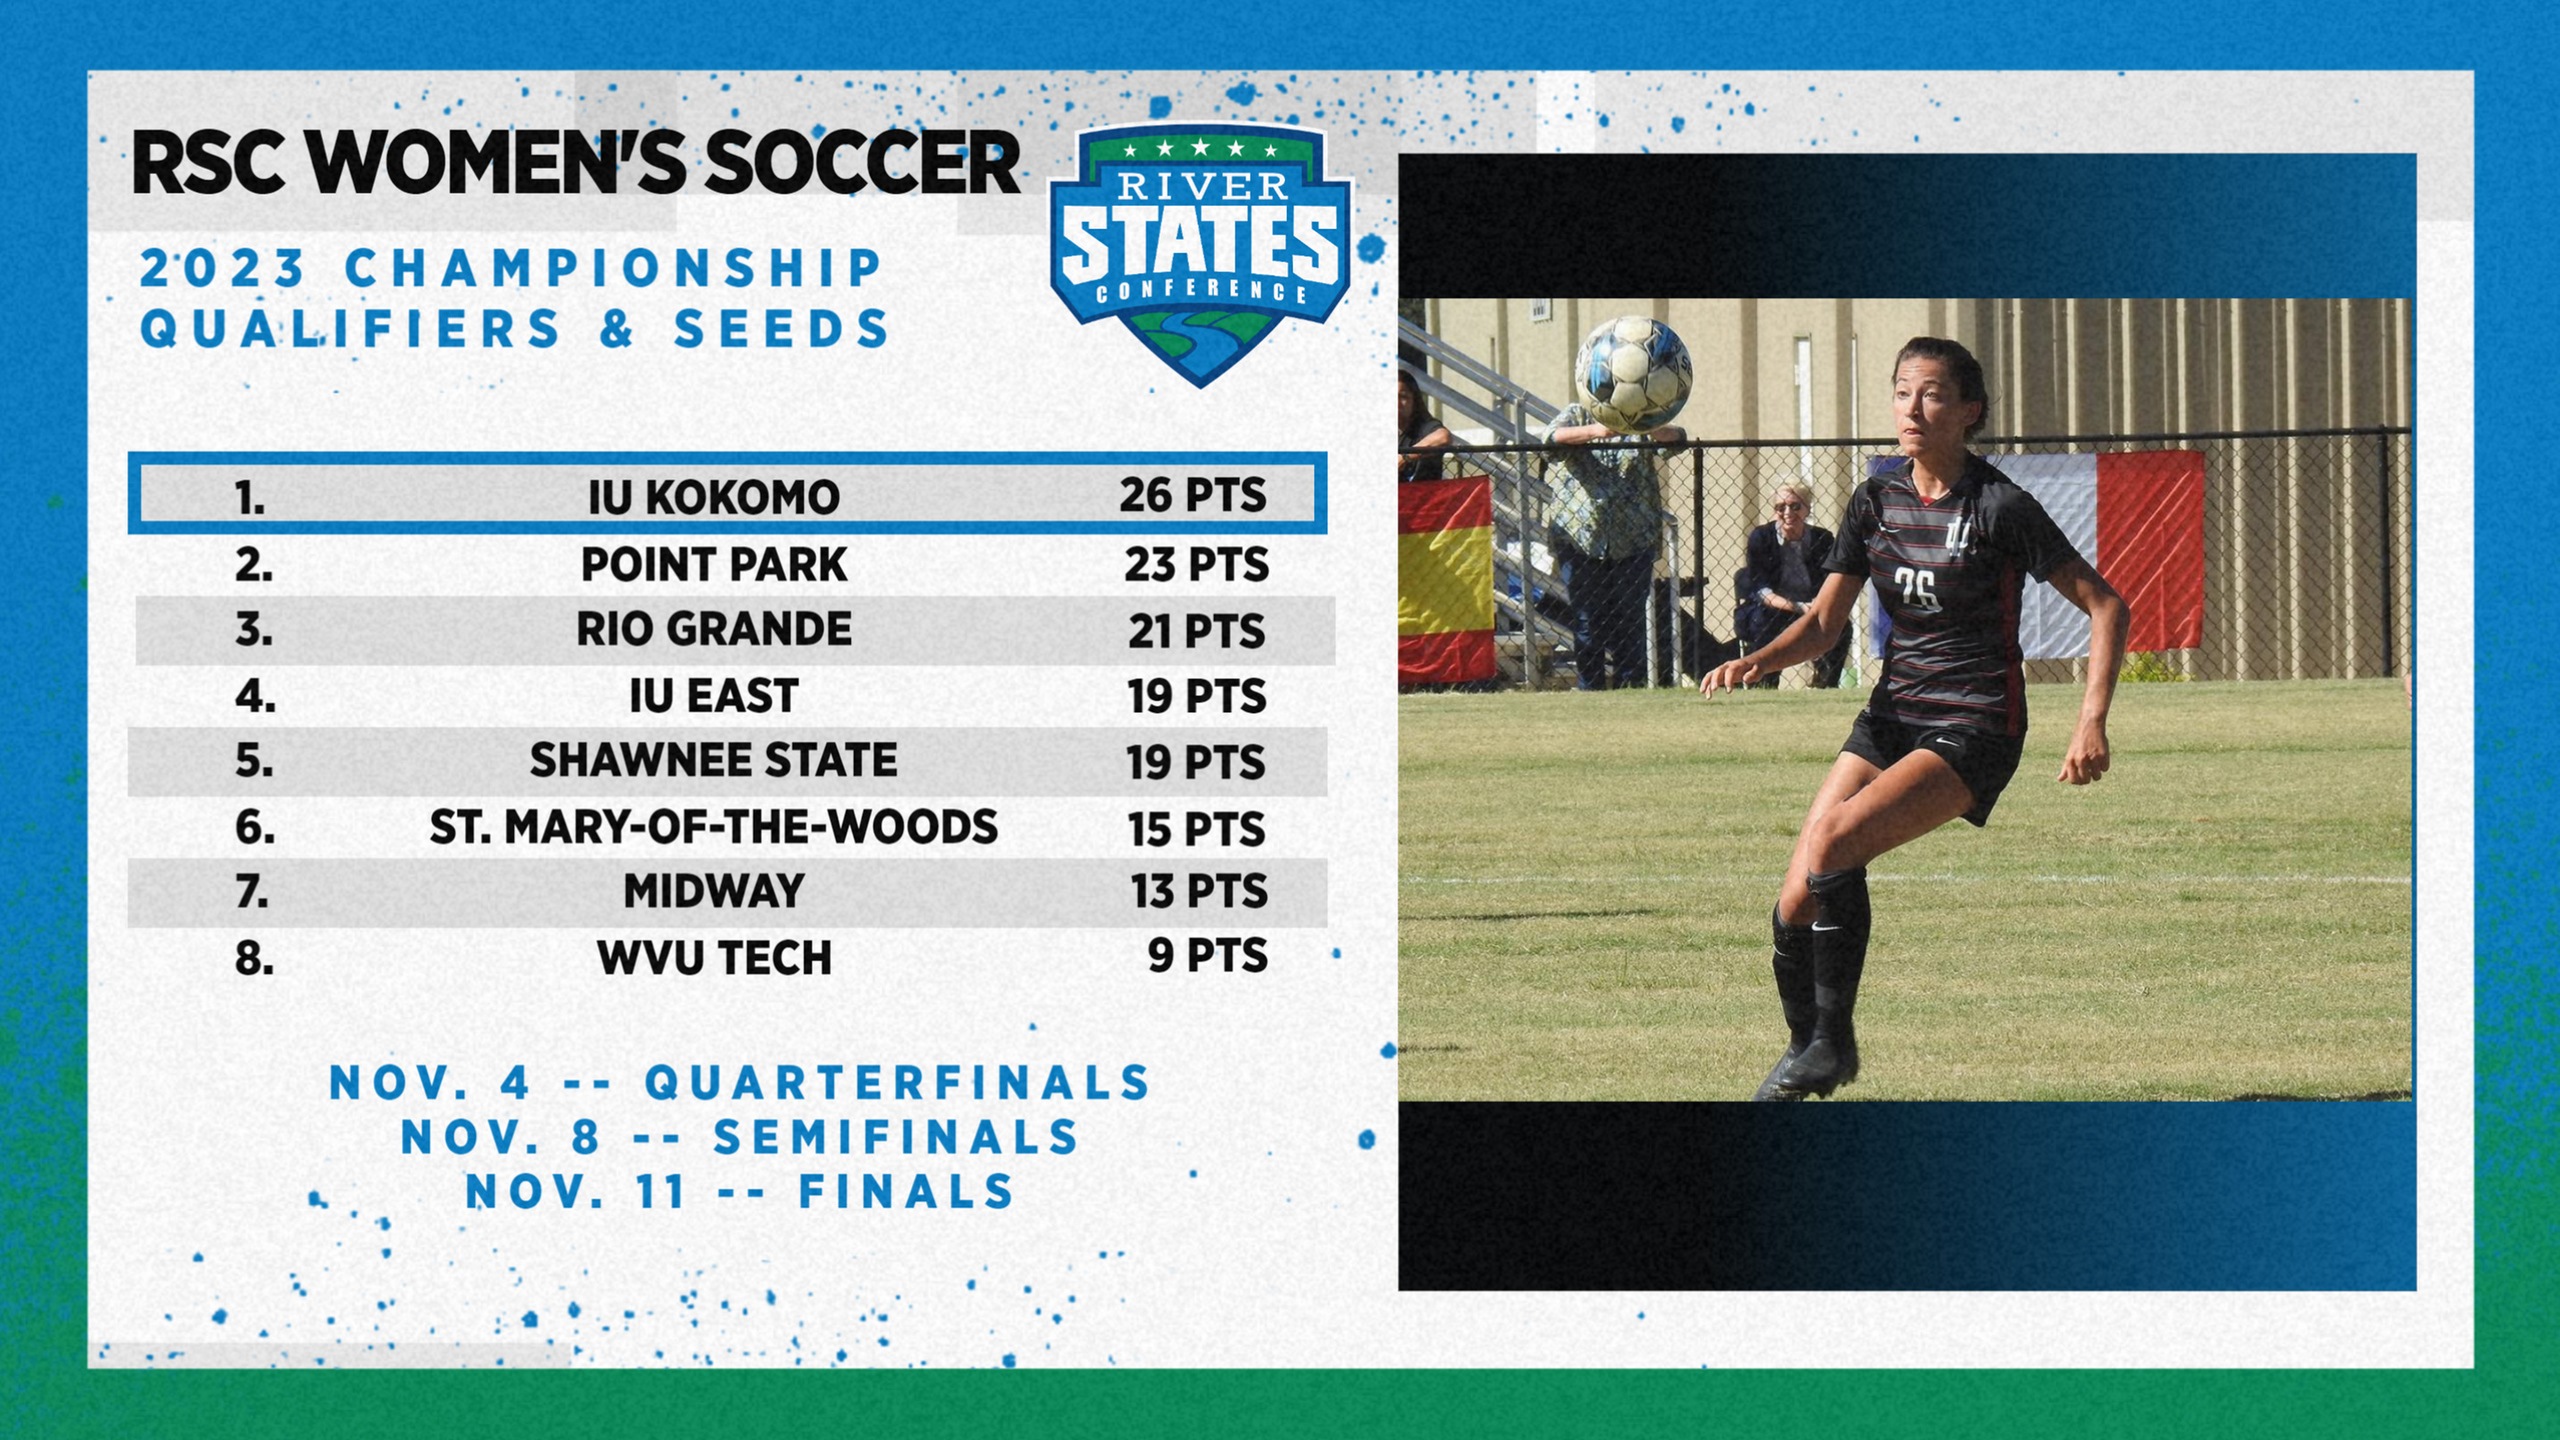 RSC Women's Soccer Championship qualifiers and seedings released